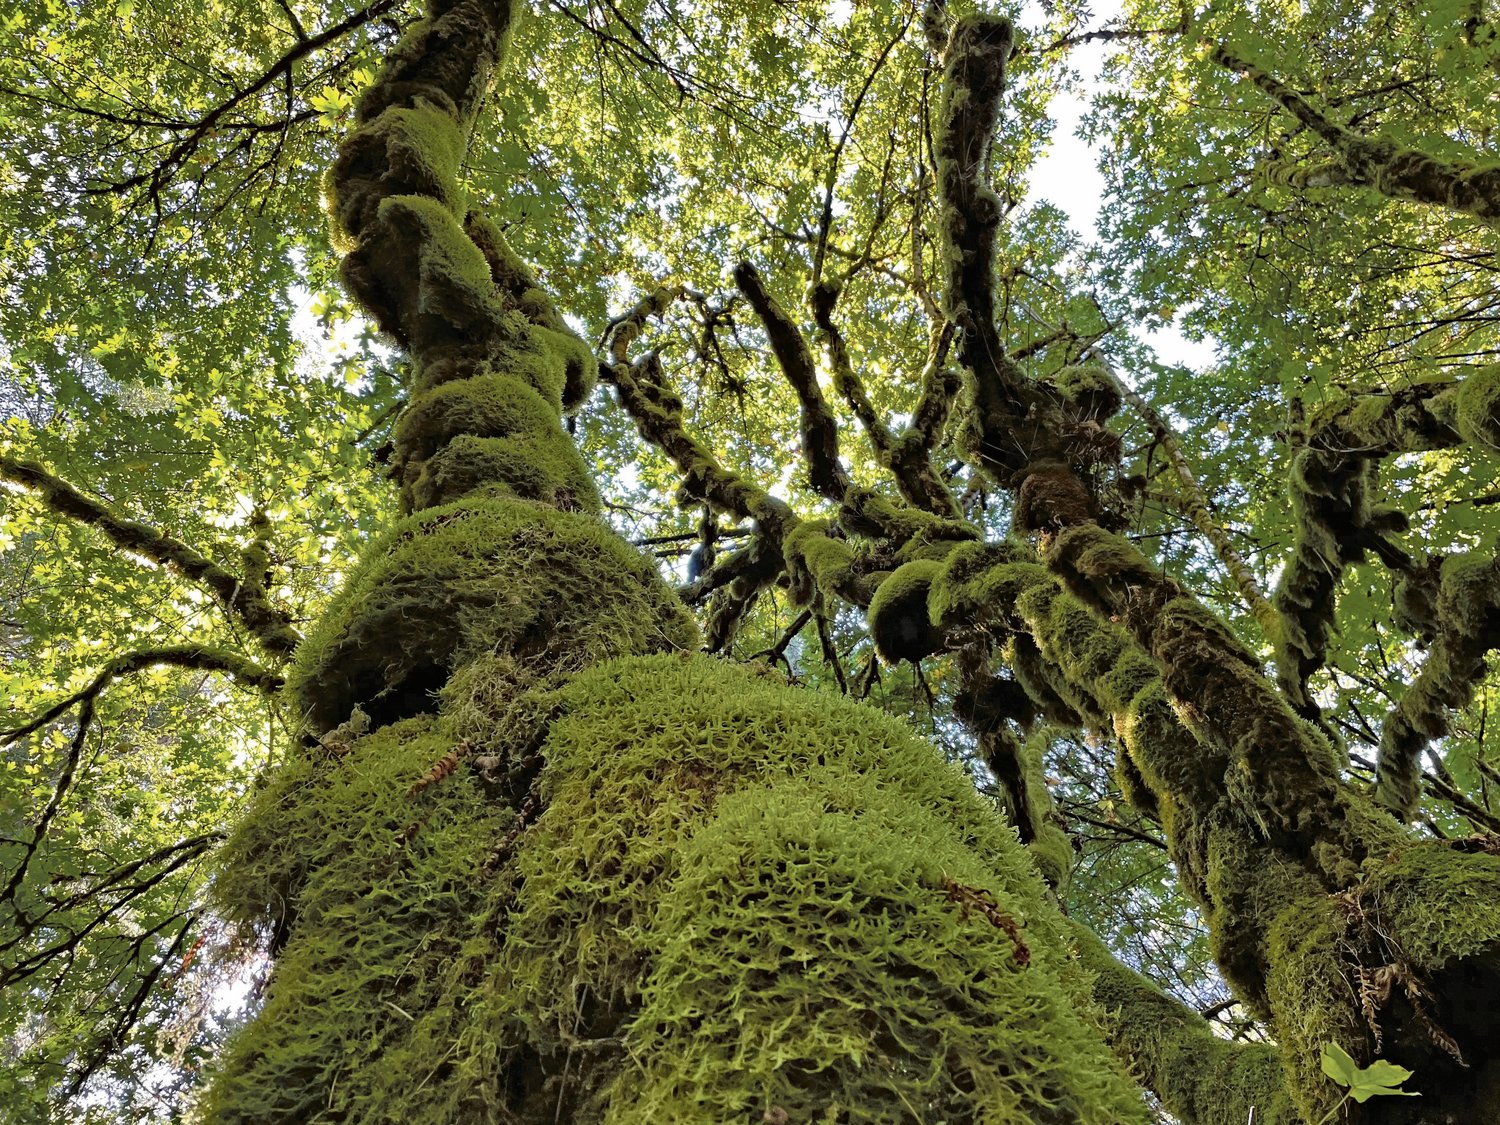 Bound to the earth, this moss-covered bigleaf maple reaches for the sky.